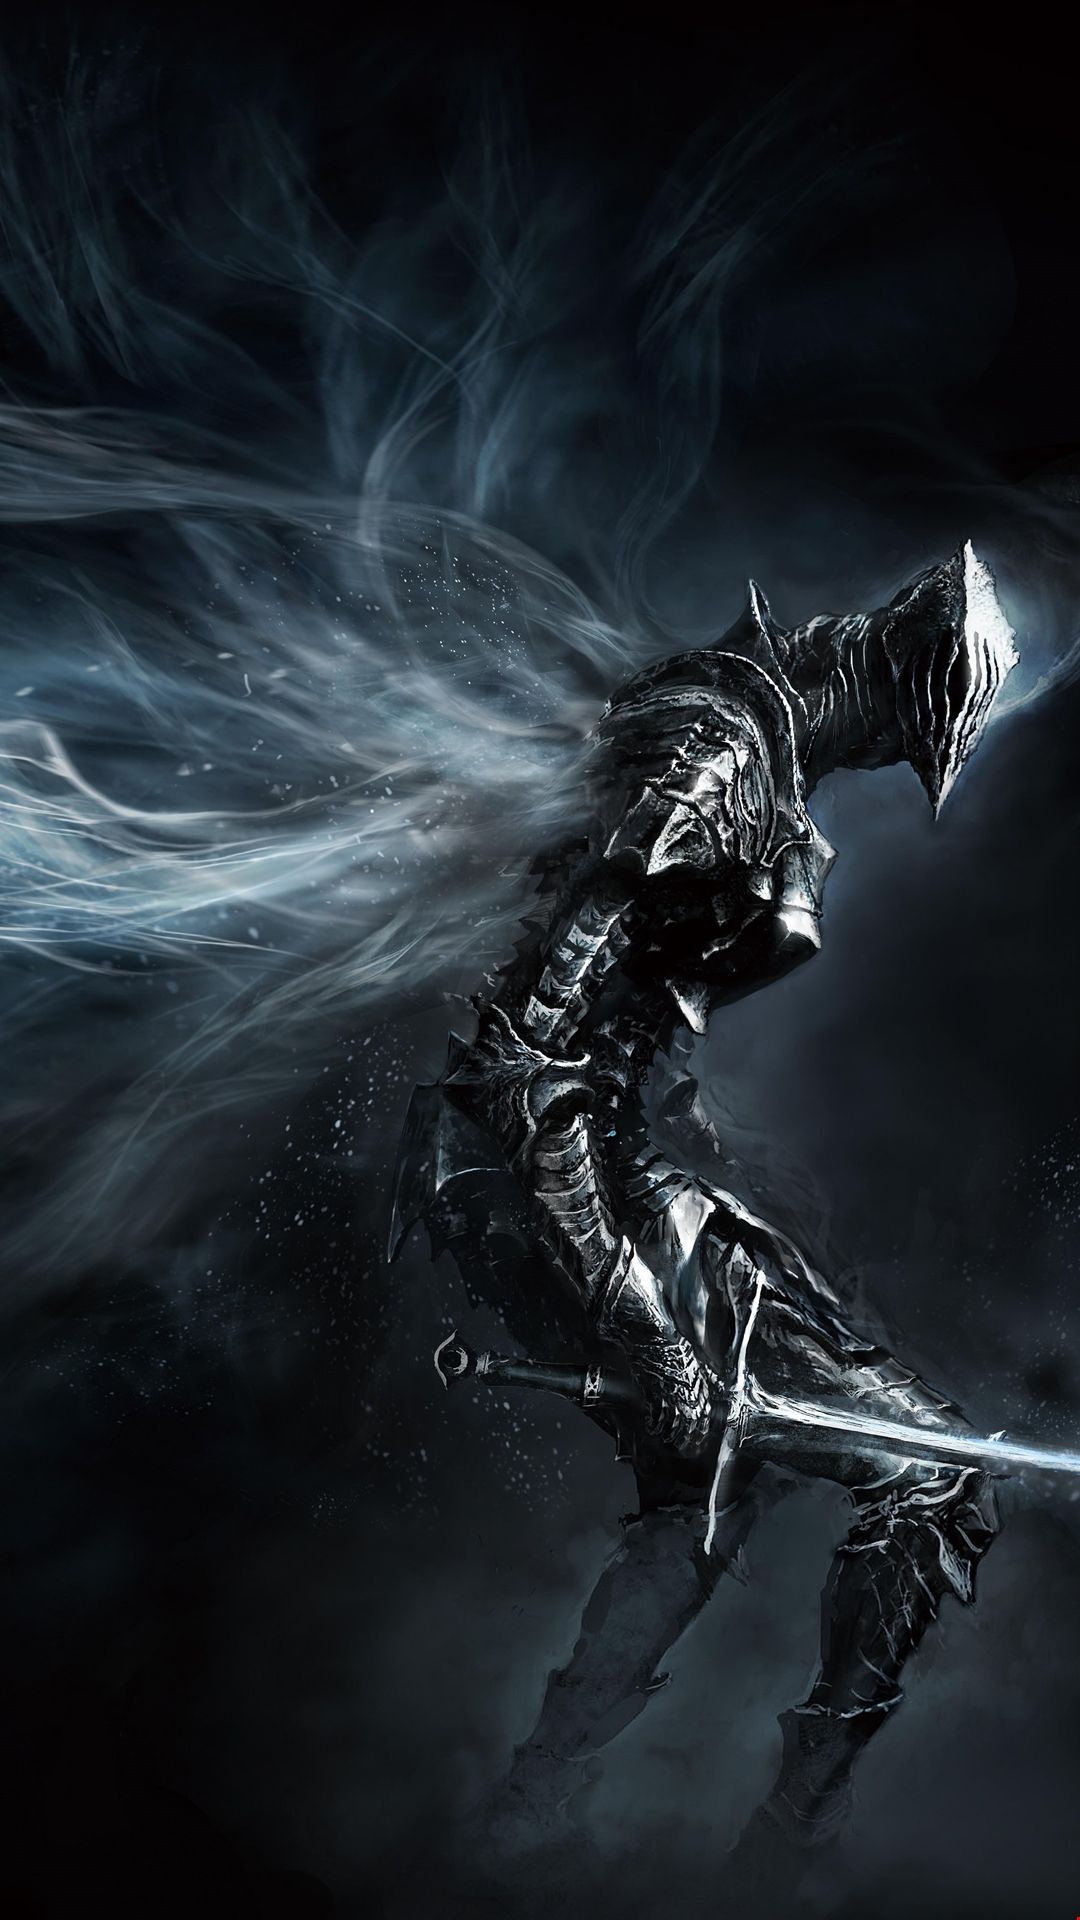 Dark Souls 3 htc one wallpaper, free and easy to download